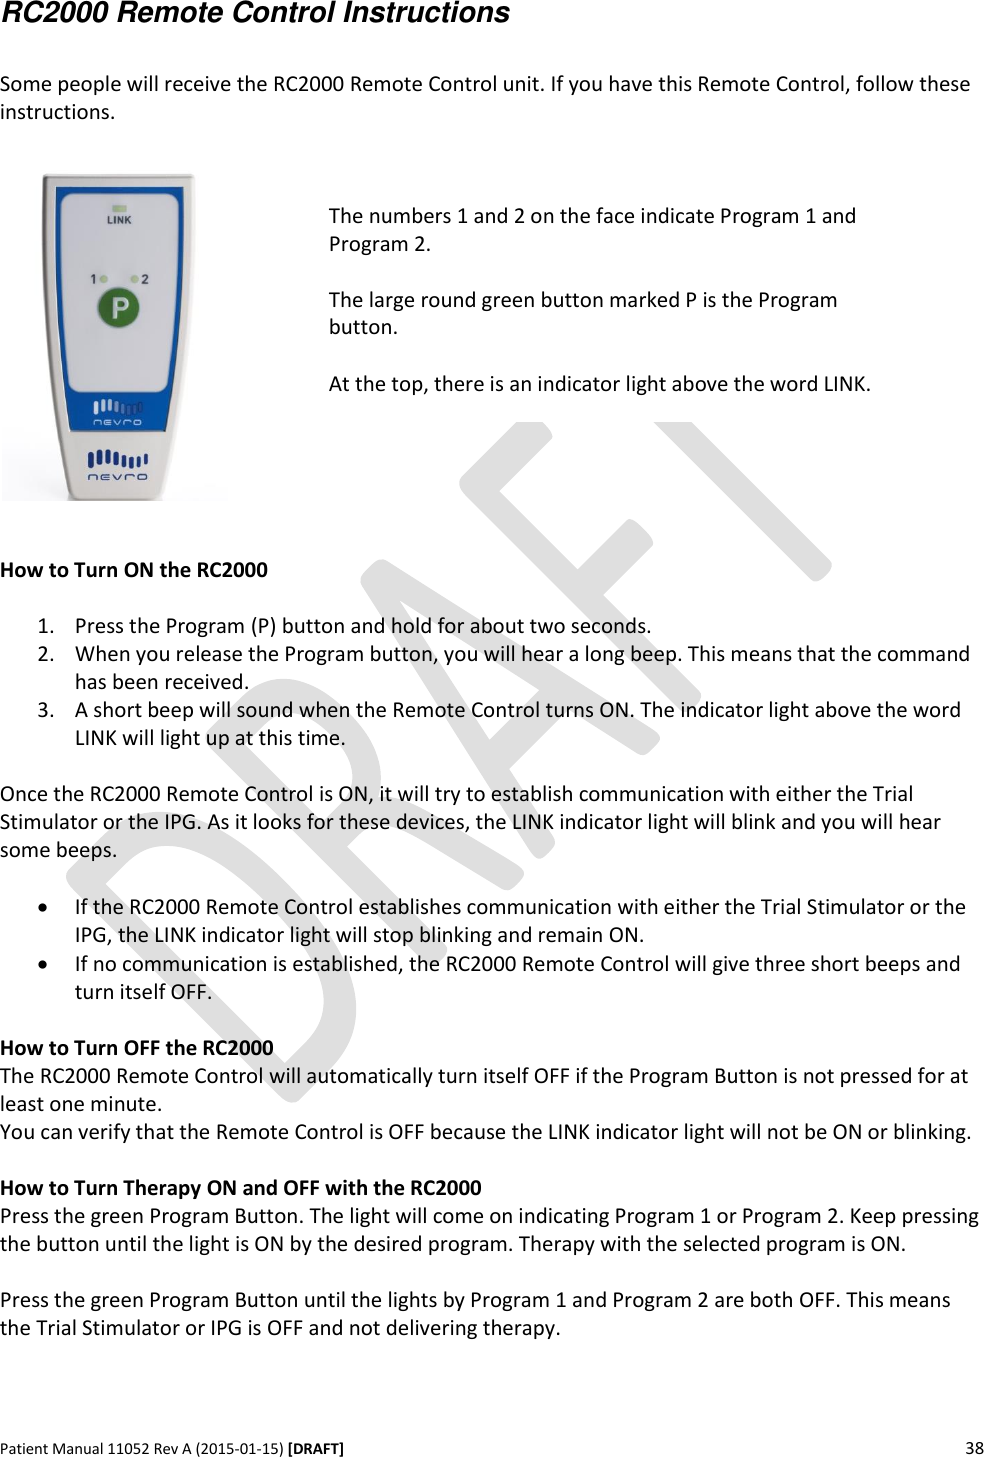      Patient Manual 11052 Rev A (2015-01-15) [DRAFT] 38    RC2000 Remote Control Instructions  Some people will receive the RC2000 Remote Control unit. If you have this Remote Control, follow these instructions.     How to Turn ON the RC2000  1. Press the Program (P) button and hold for about two seconds. 2. When you release the Program button, you will hear a long beep. This means that the command has been received. 3. A short beep will sound when the Remote Control turns ON. The indicator light above the word LINK will light up at this time.  Once the RC2000 Remote Control is ON, it will try to establish communication with either the Trial Stimulator or the IPG. As it looks for these devices, the LINK indicator light will blink and you will hear some beeps.   If the RC2000 Remote Control establishes communication with either the Trial Stimulator or the IPG, the LINK indicator light will stop blinking and remain ON.  If no communication is established, the RC2000 Remote Control will give three short beeps and turn itself OFF.  How to Turn OFF the RC2000 The RC2000 Remote Control will automatically turn itself OFF if the Program Button is not pressed for at least one minute. You can verify that the Remote Control is OFF because the LINK indicator light will not be ON or blinking.  How to Turn Therapy ON and OFF with the RC2000 Press the green Program Button. The light will come on indicating Program 1 or Program 2. Keep pressing the button until the light is ON by the desired program. Therapy with the selected program is ON.  Press the green Program Button until the lights by Program 1 and Program 2 are both OFF. This means the Trial Stimulator or IPG is OFF and not delivering therapy.      The numbers 1 and 2 on the face indicate Program 1 and Program 2.  The large round green button marked P is the Program button.  At the top, there is an indicator light above the word LINK. 